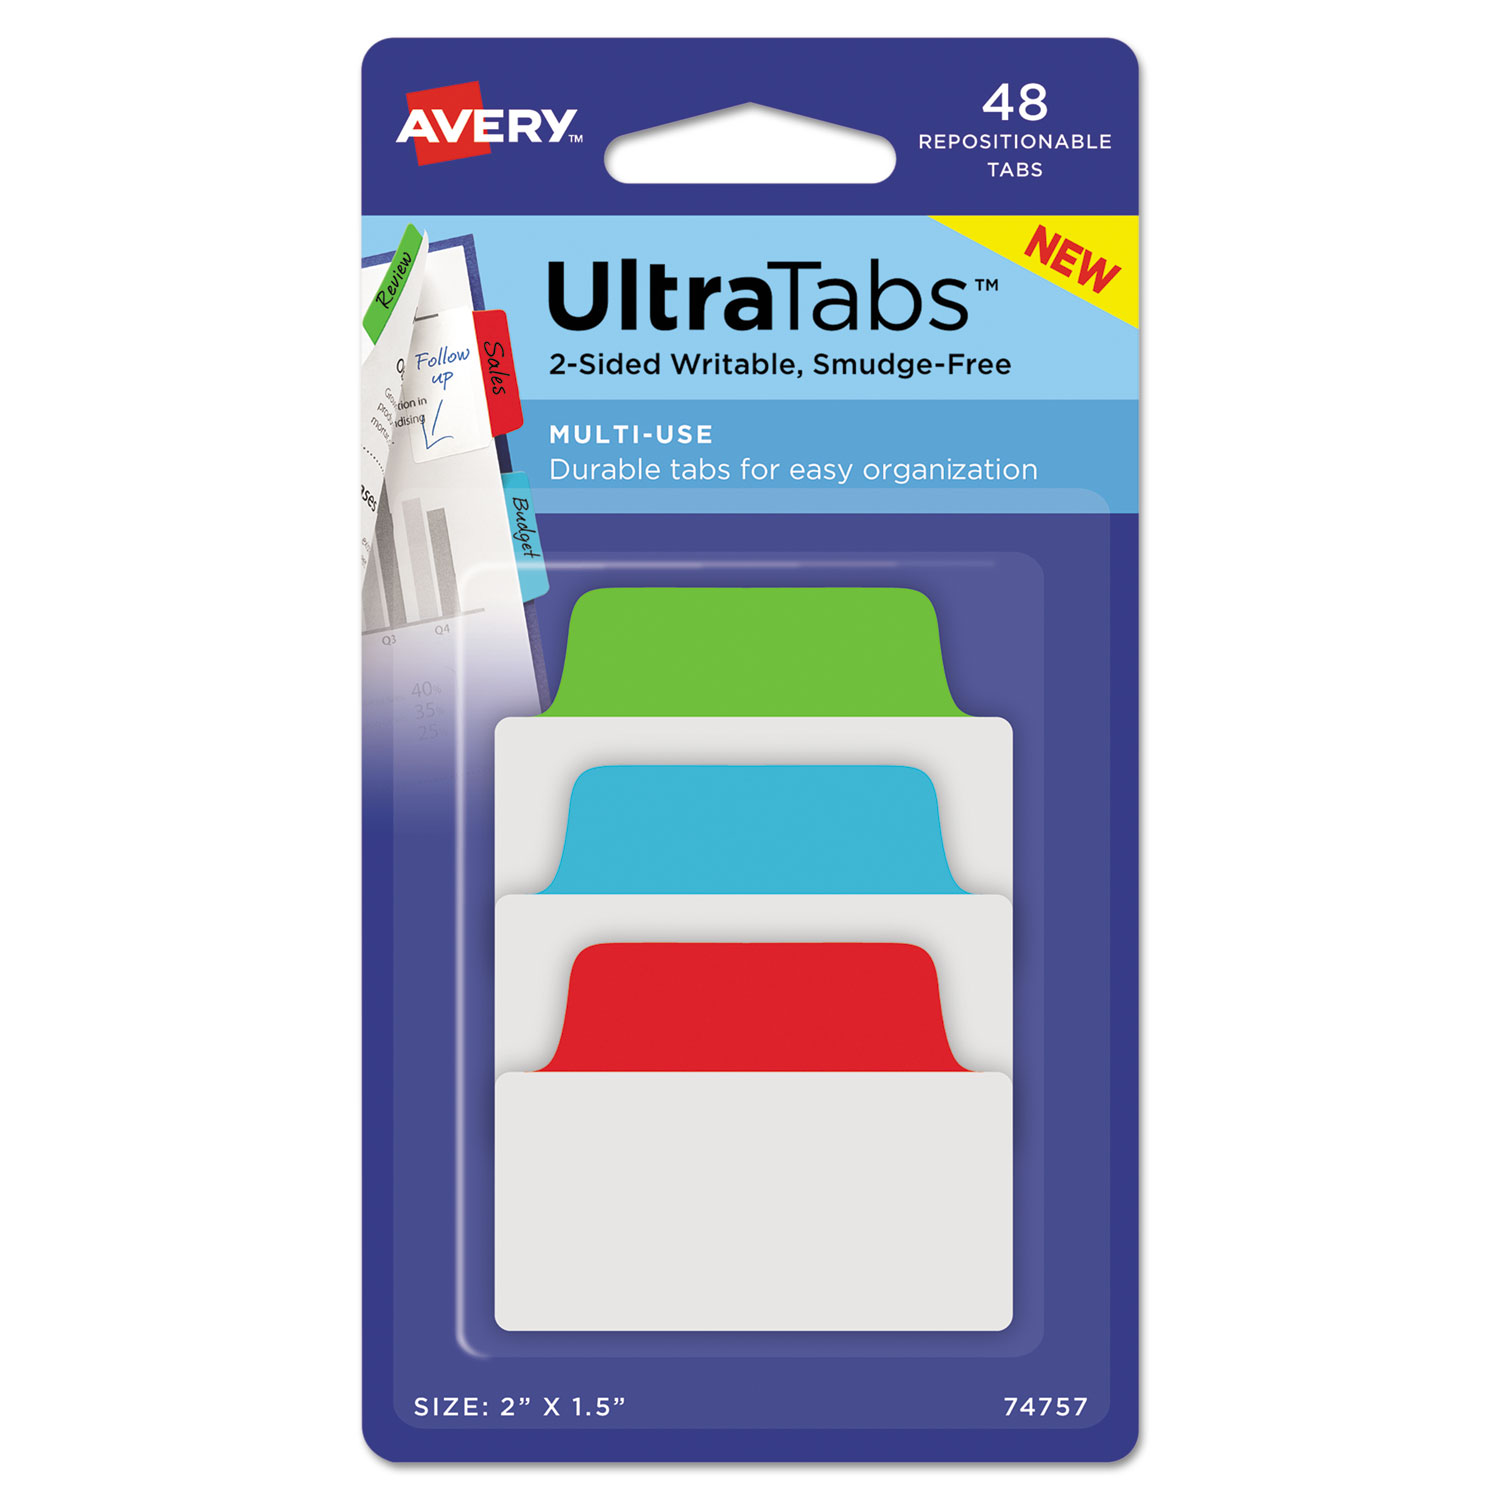 CLARITY Re-usable repositionable GROOVI STICKER TABS 16 50mm x 25mm GRO-AC-40437 